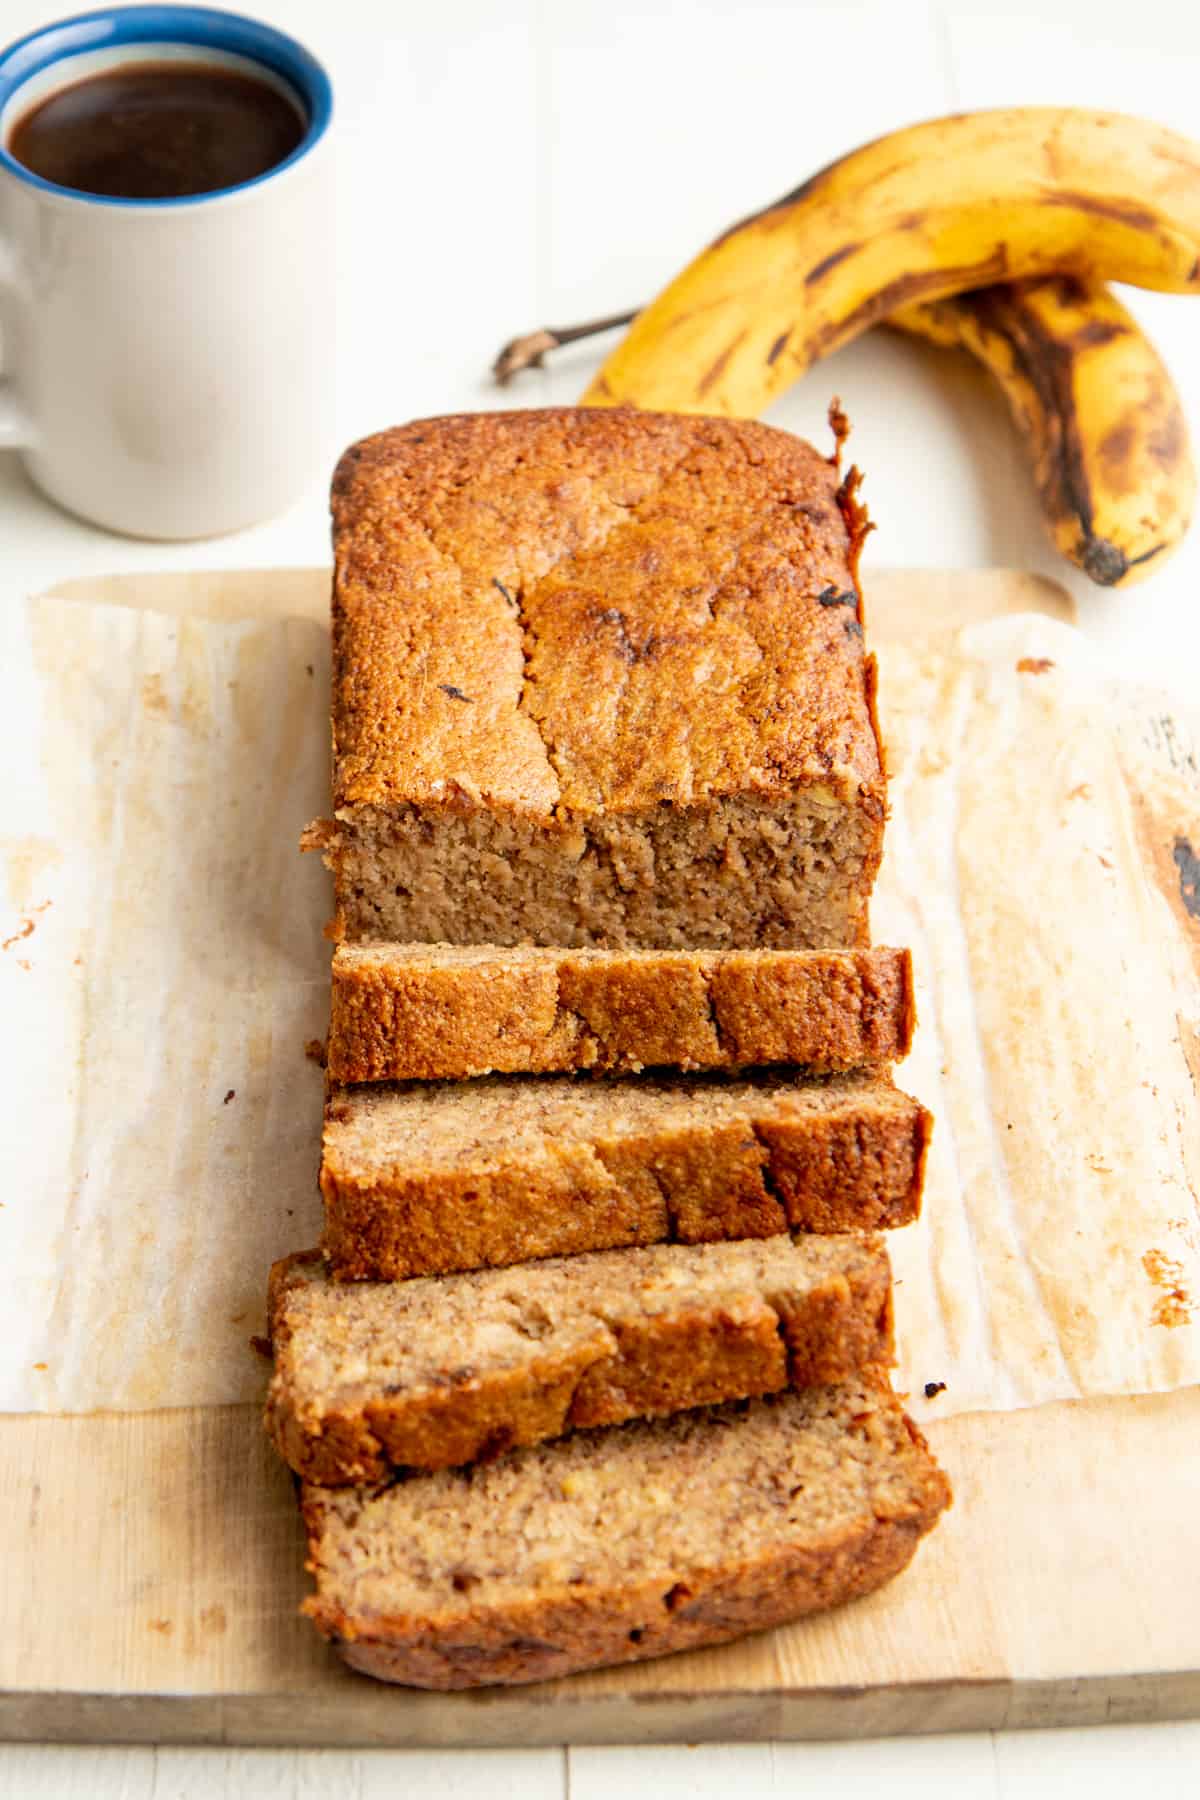 A loaf of almond flour banana bread is cut into slices.